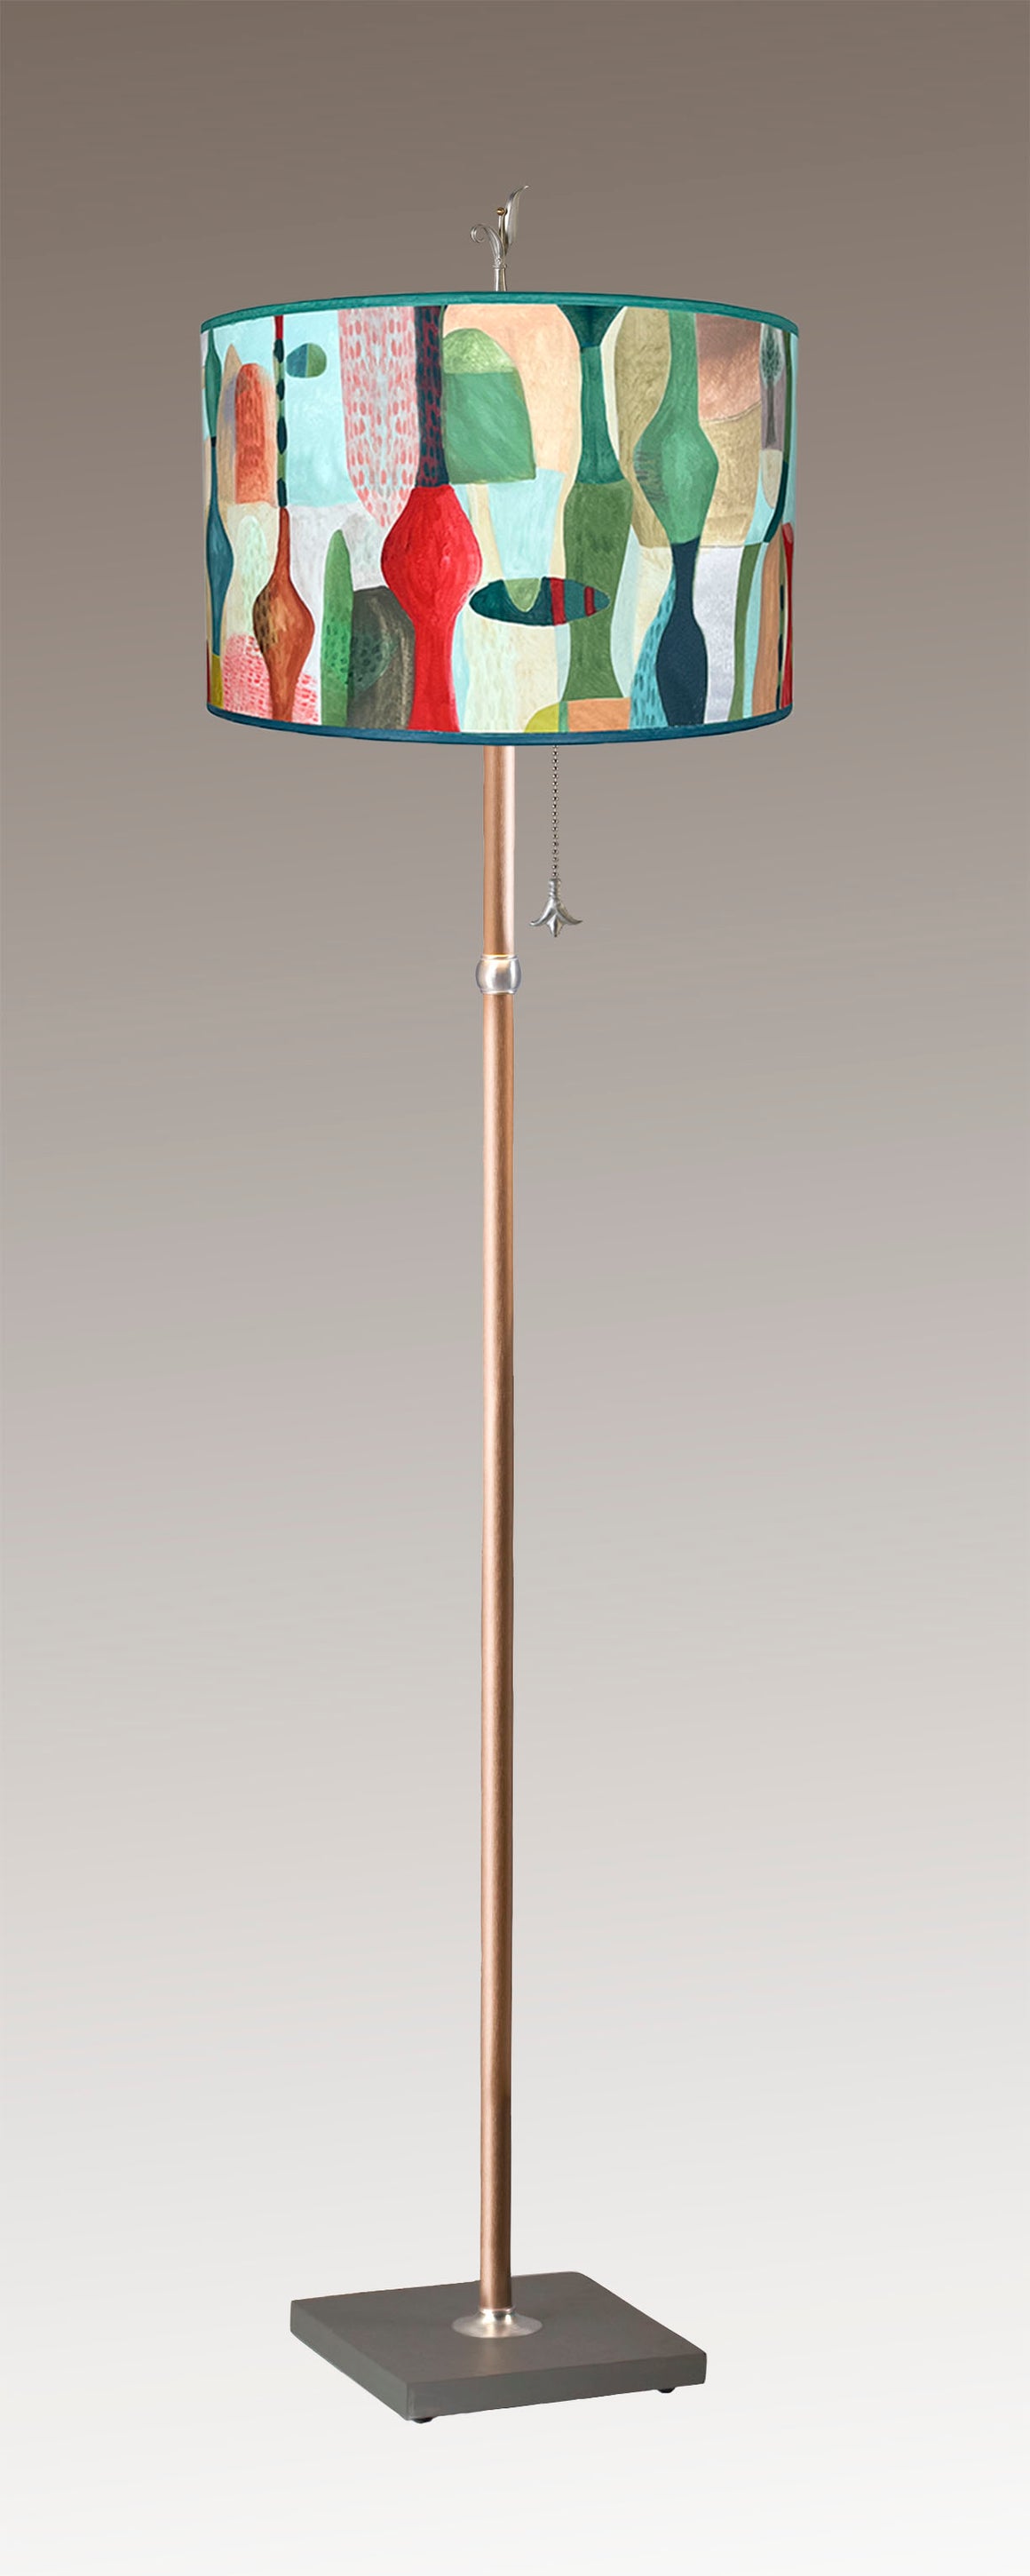 Copper Floor Lamp with Large Drum Shade in Riviera in Poppy